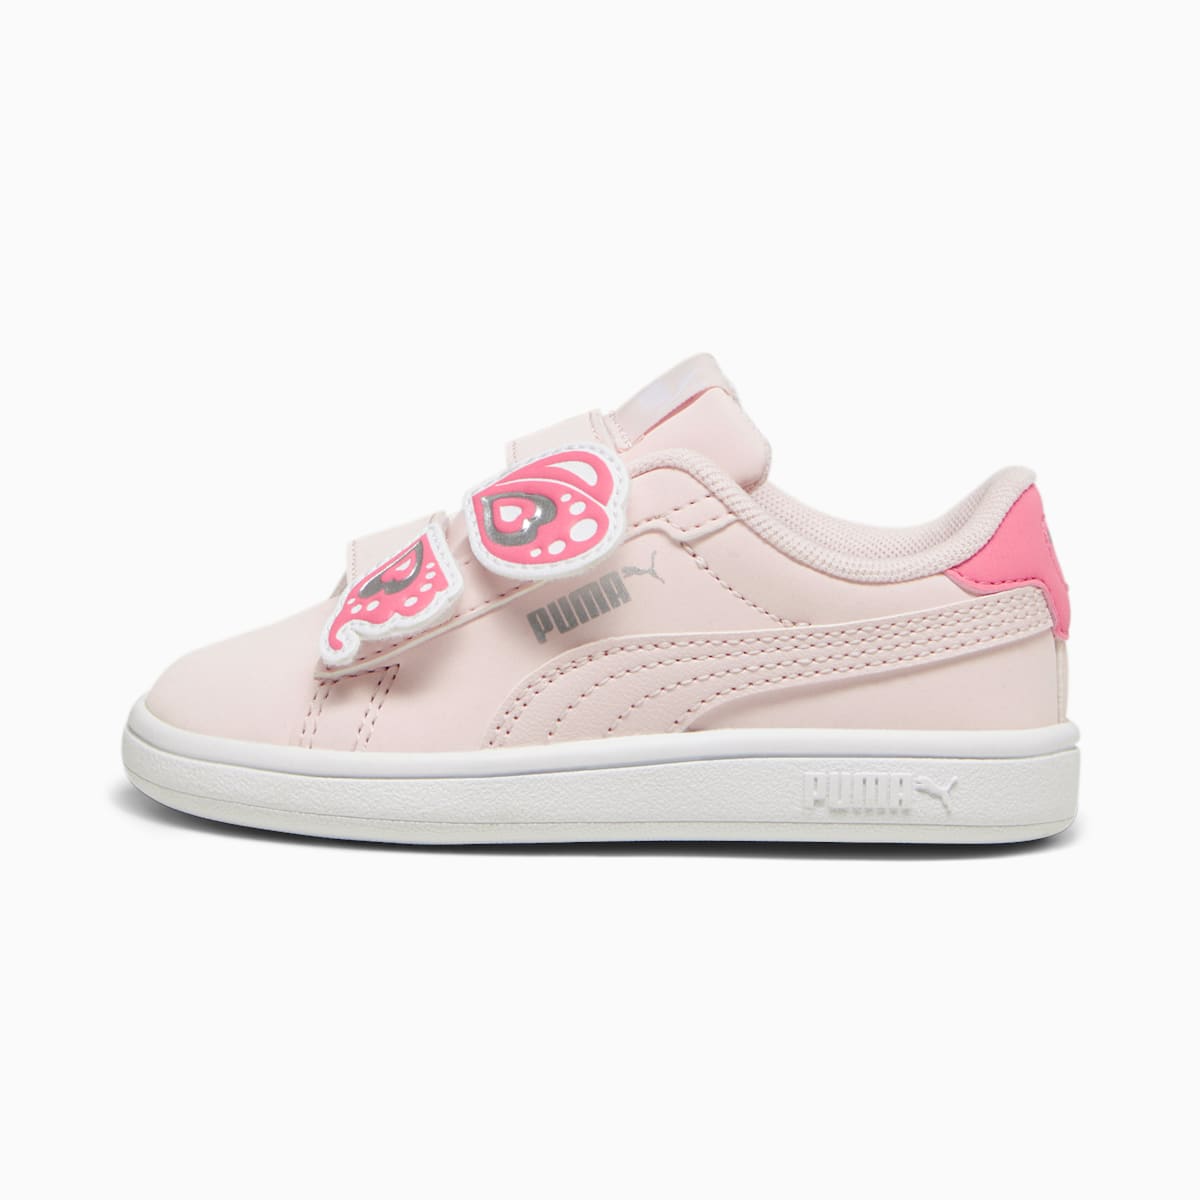 PUMA Smash 3.0 Butterfly Toddlers' Sneakers